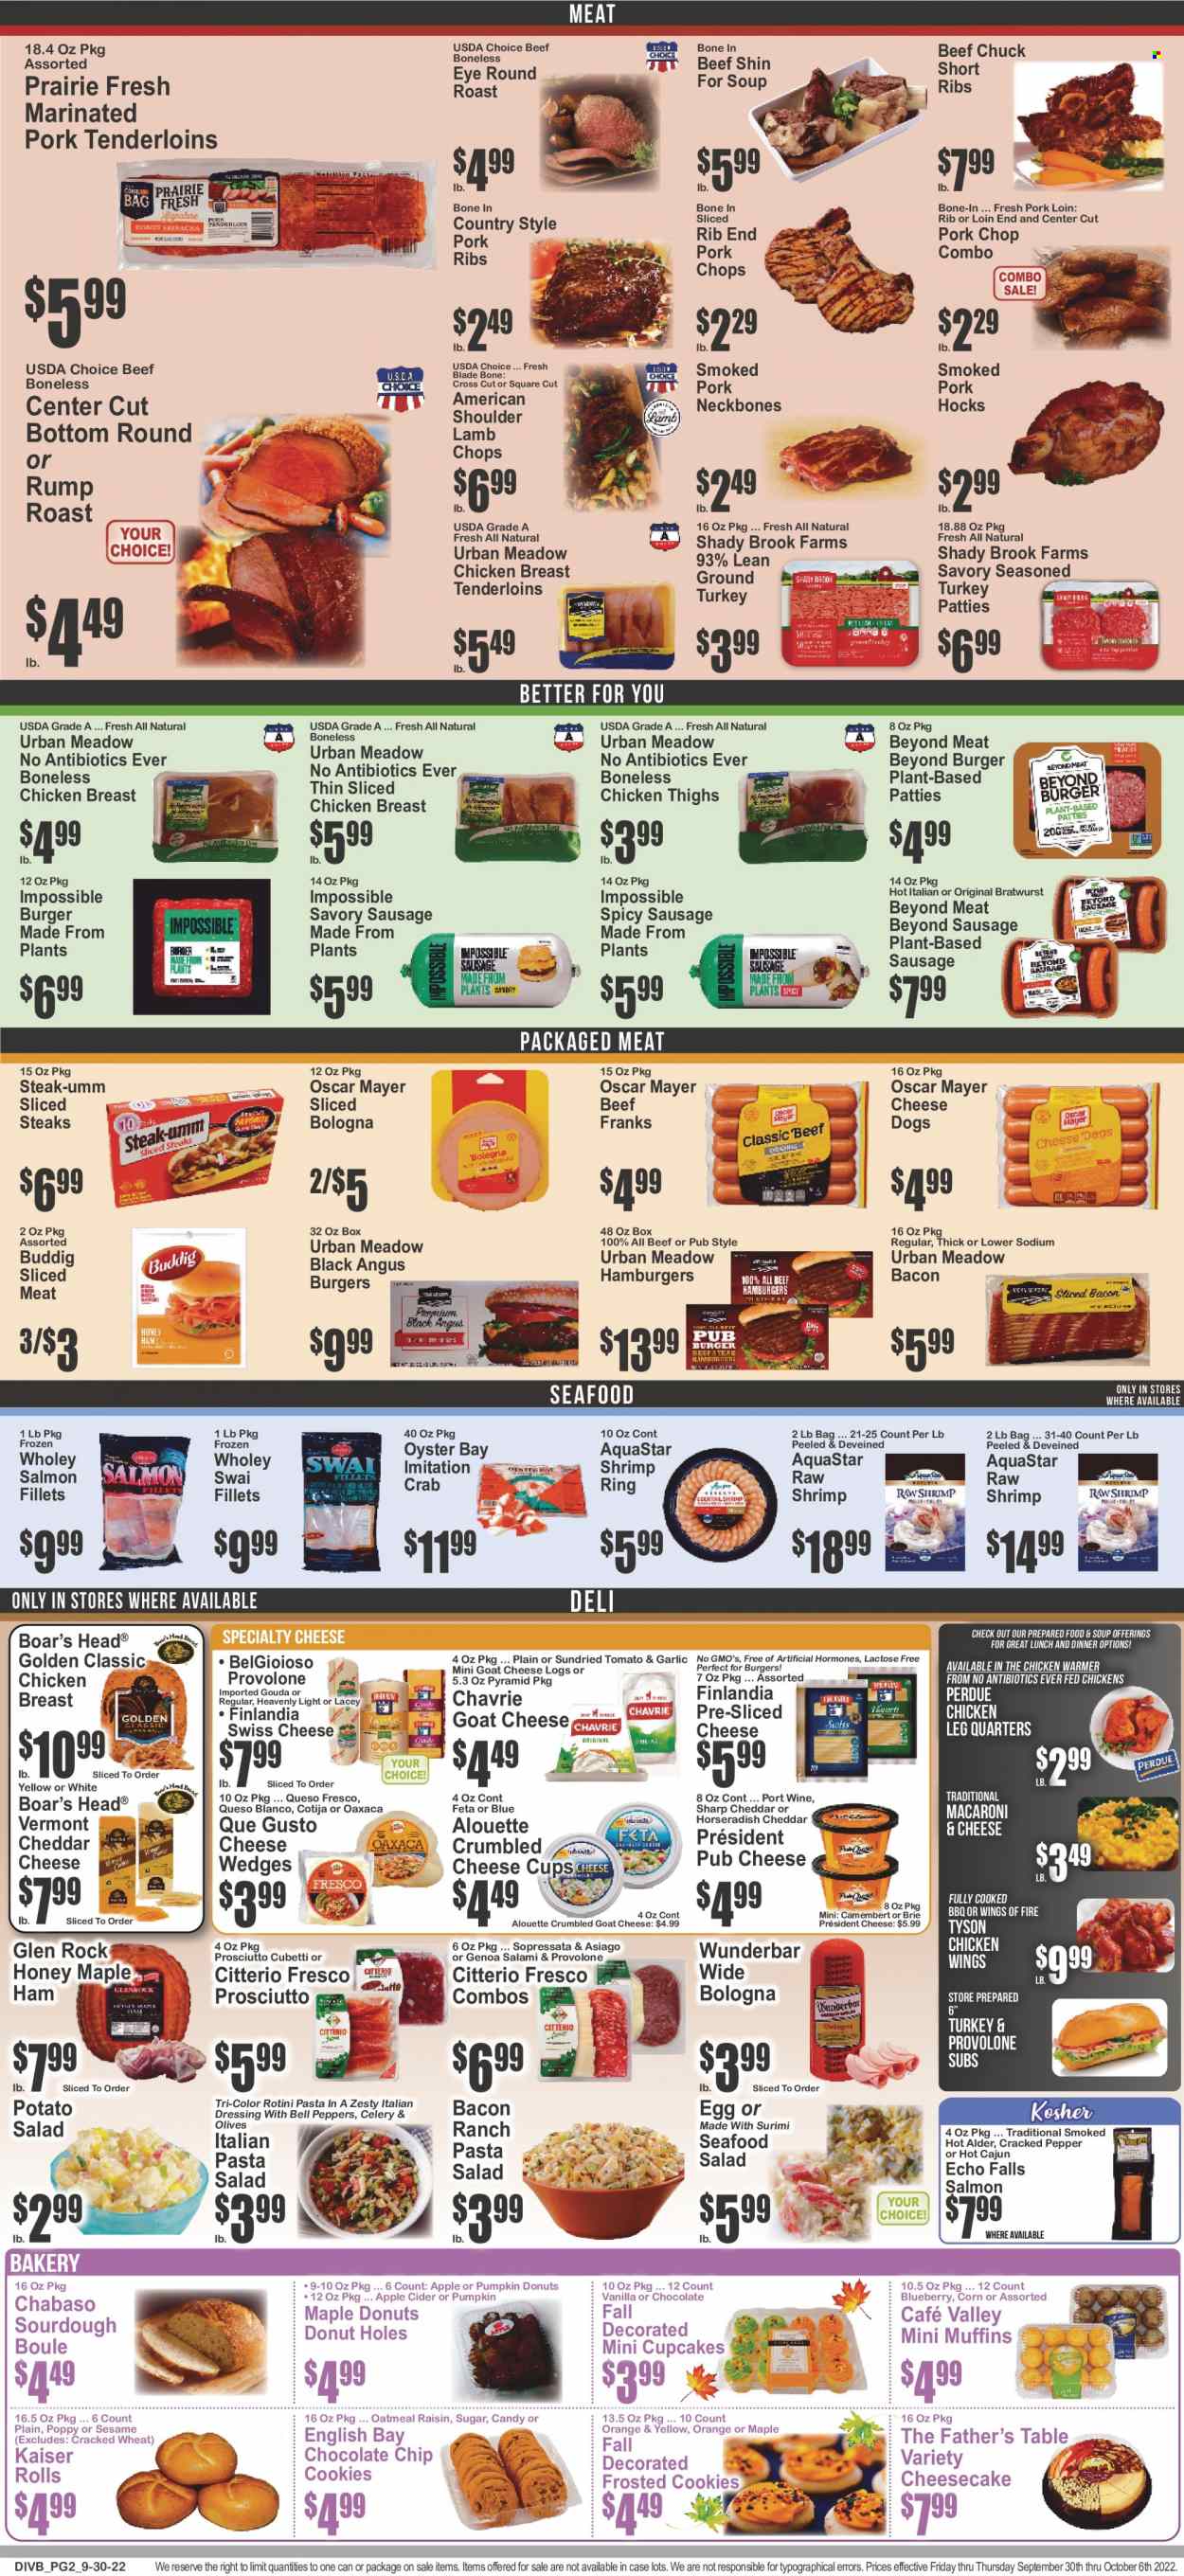 thumbnail - Food Universe Flyer - 09/30/2022 - 10/06/2022 - Sales products - Father's Table, cupcake, donut holes, cheesecake, muffin, celery, corn, horseradish, pumpkin, salad, oranges, salmon, salmon fillet, oysters, seafood, crab, shrimps, swai fillet, macaroni & cheese, soup, hamburger, pasta, Perdue®, bacon, salami, ham, prosciutto, bologna sausage, Oscar Mayer, bratwurst, sausage, potato salad, seafood salad, pasta salad, smoked pork hock, asiago, camembert, goat cheese, gouda, sliced cheese, swiss cheese, queso fresco, cheese cup, pub cheese, brie, Président, feta, Provolone, eggs, italian dressing, chicken wings, cookies, sugar, oatmeal, olives, dressing, honey, apple cider, port wine, cider, ground turkey, chicken breasts, chicken legs, chicken thighs, beef meat, steak, round roast, pork chops, pork loin, pork meat, pork ribs, pork tenderloin, marinated pork, lamb chops, lamb meat, cup. Page 2.